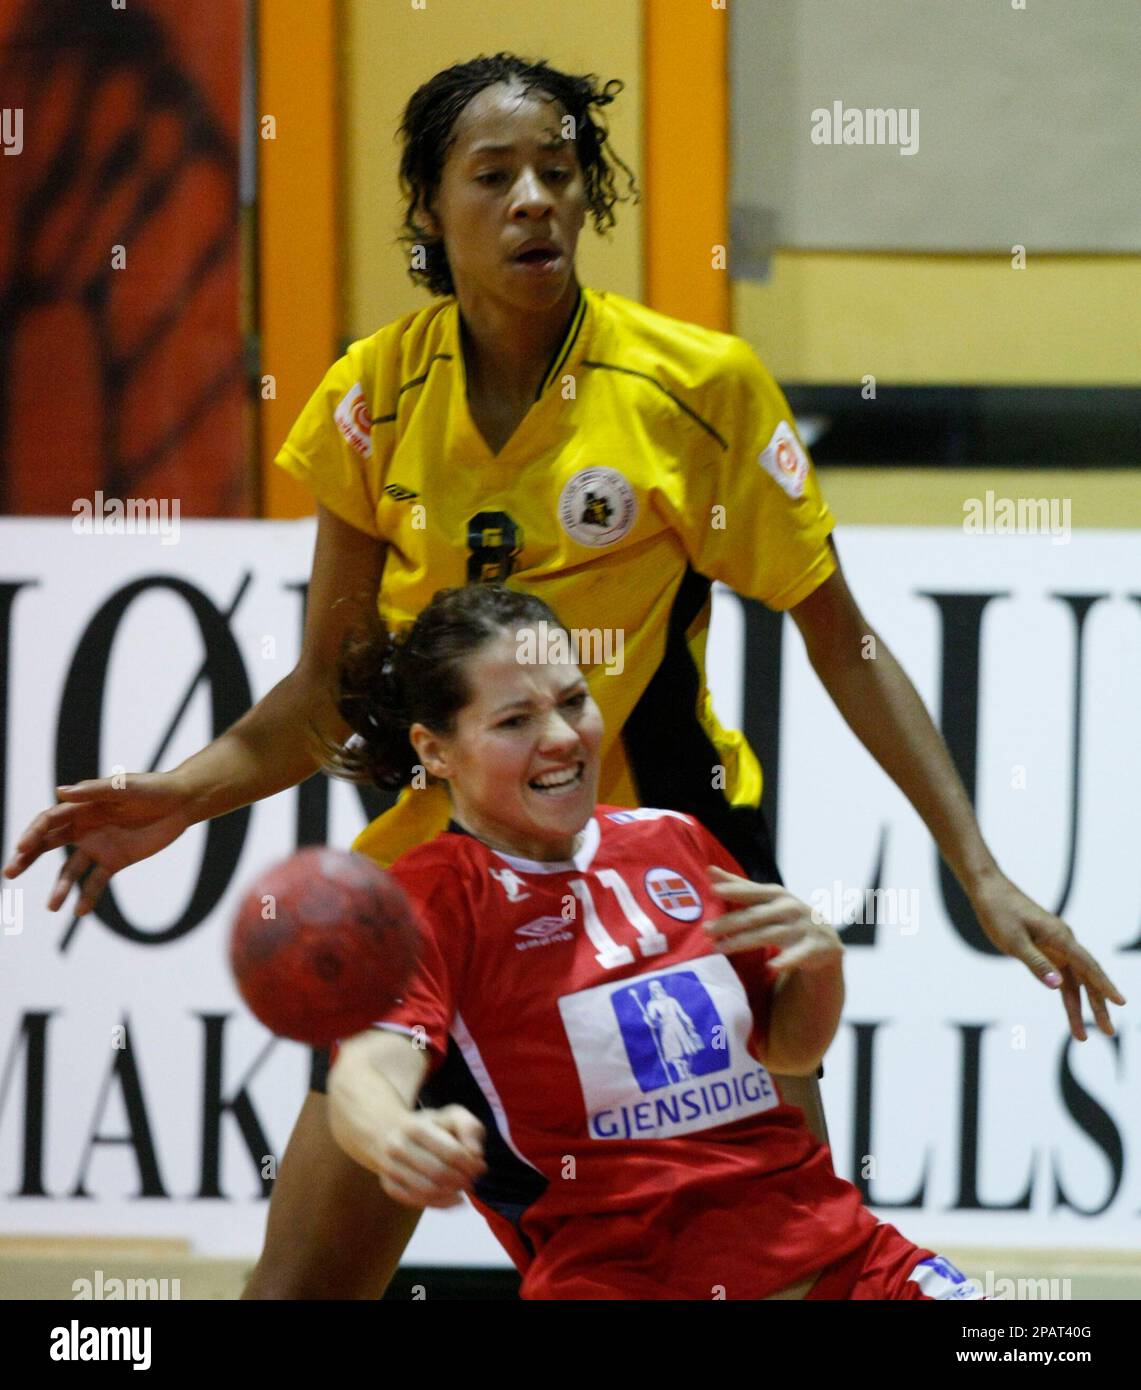 Angola's Nair Almeida and Norway's Kari Mette Johansen, front, fight for  the ball during their teams' match in the Mobelringen Cup in Sandefjord,  Norway Friday Nov. 23, 2007. (AP Photo/Morten Holm, Scanpix) **